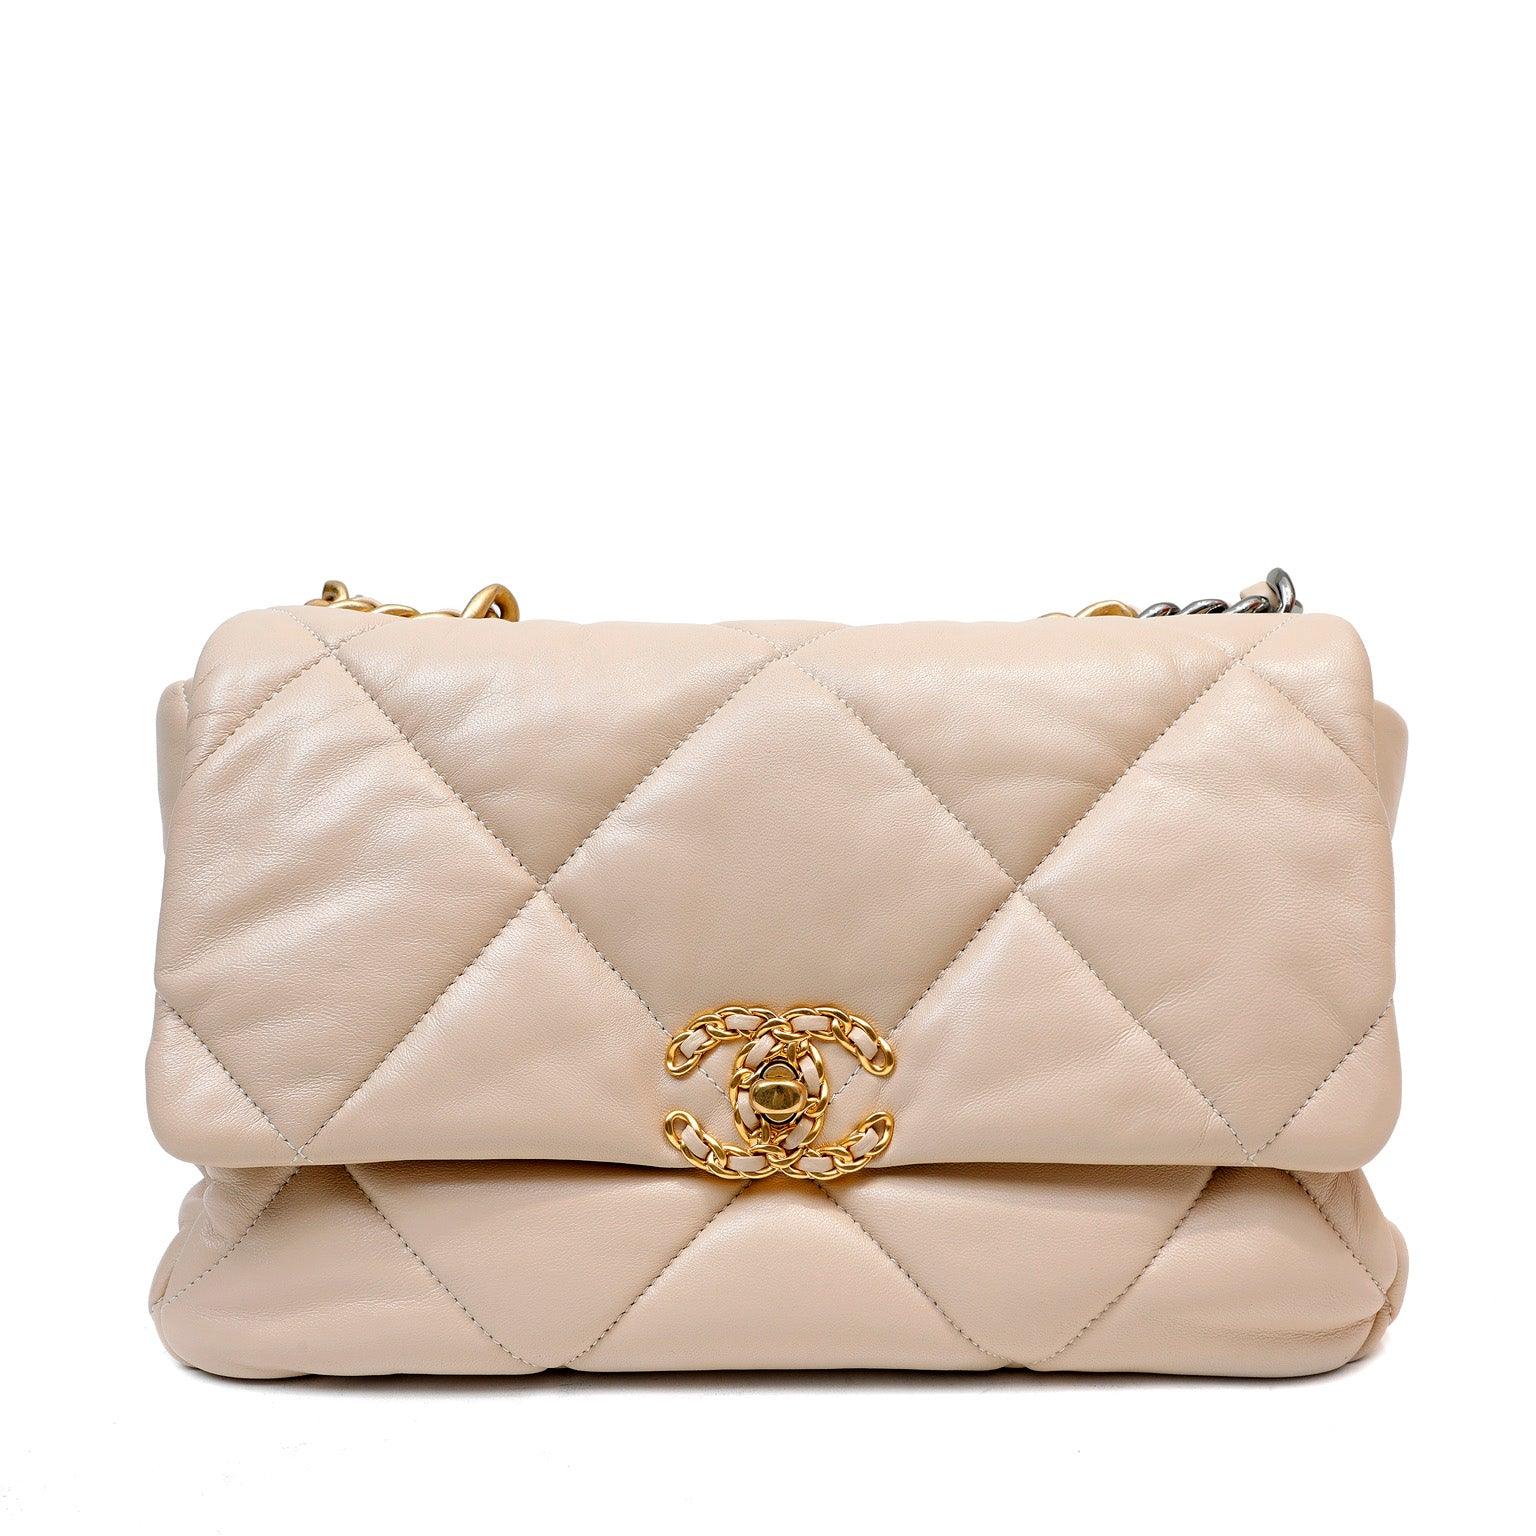 Get your hands on the stunning Chanel Beige 19 Bag with Mixed Metal Hardware  – Only Authentics